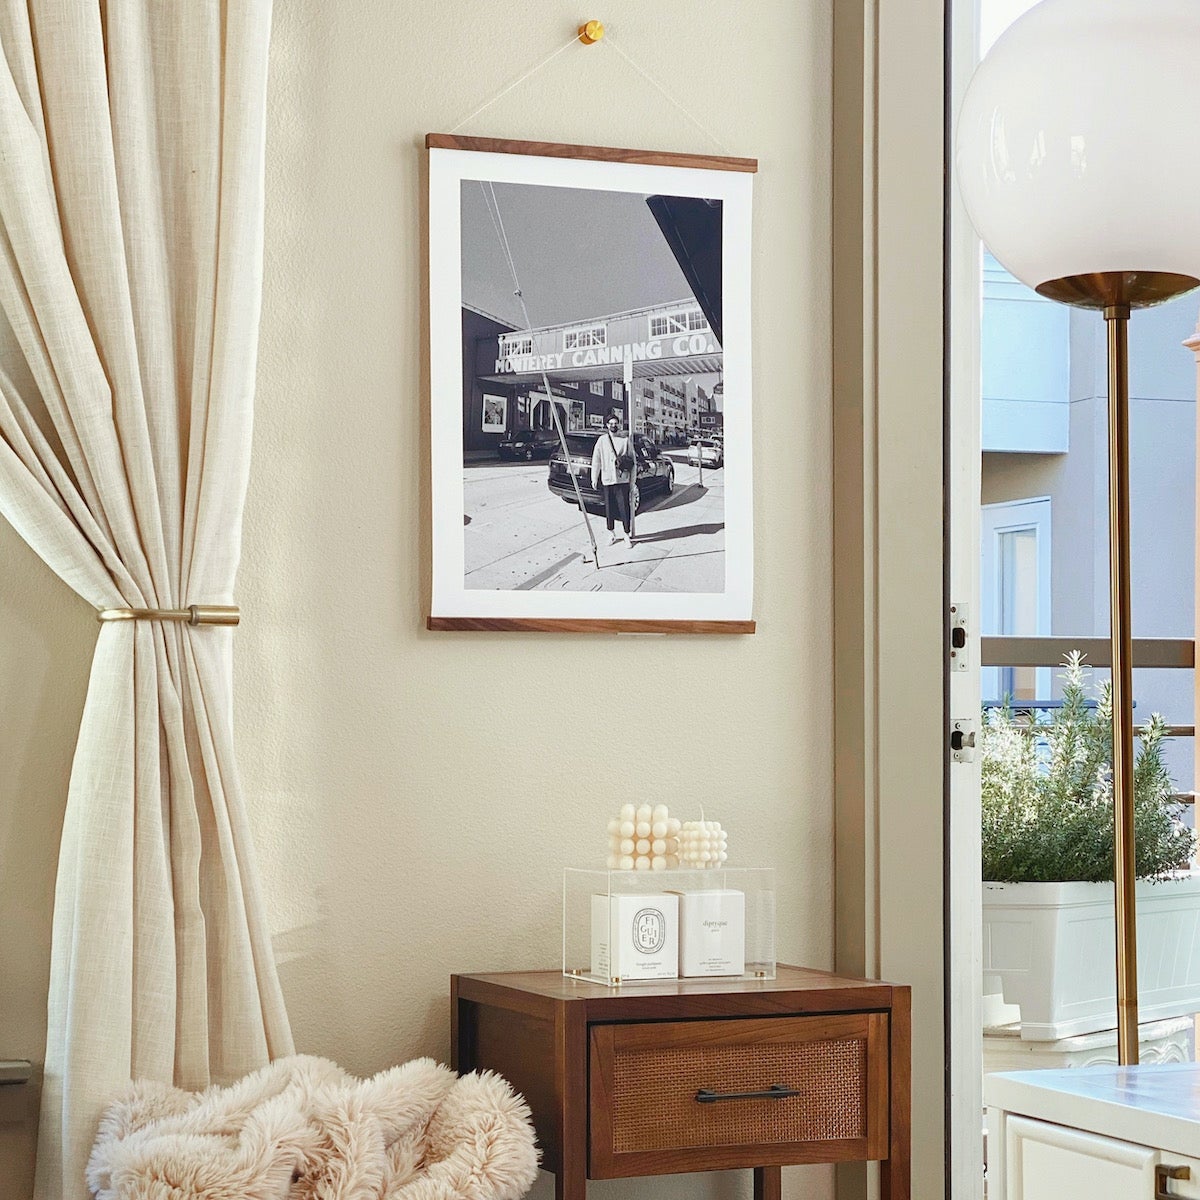 Large Artifact Uprising print featuring photo of man in front of old canning company hanging from print hanger in corner with nightstand